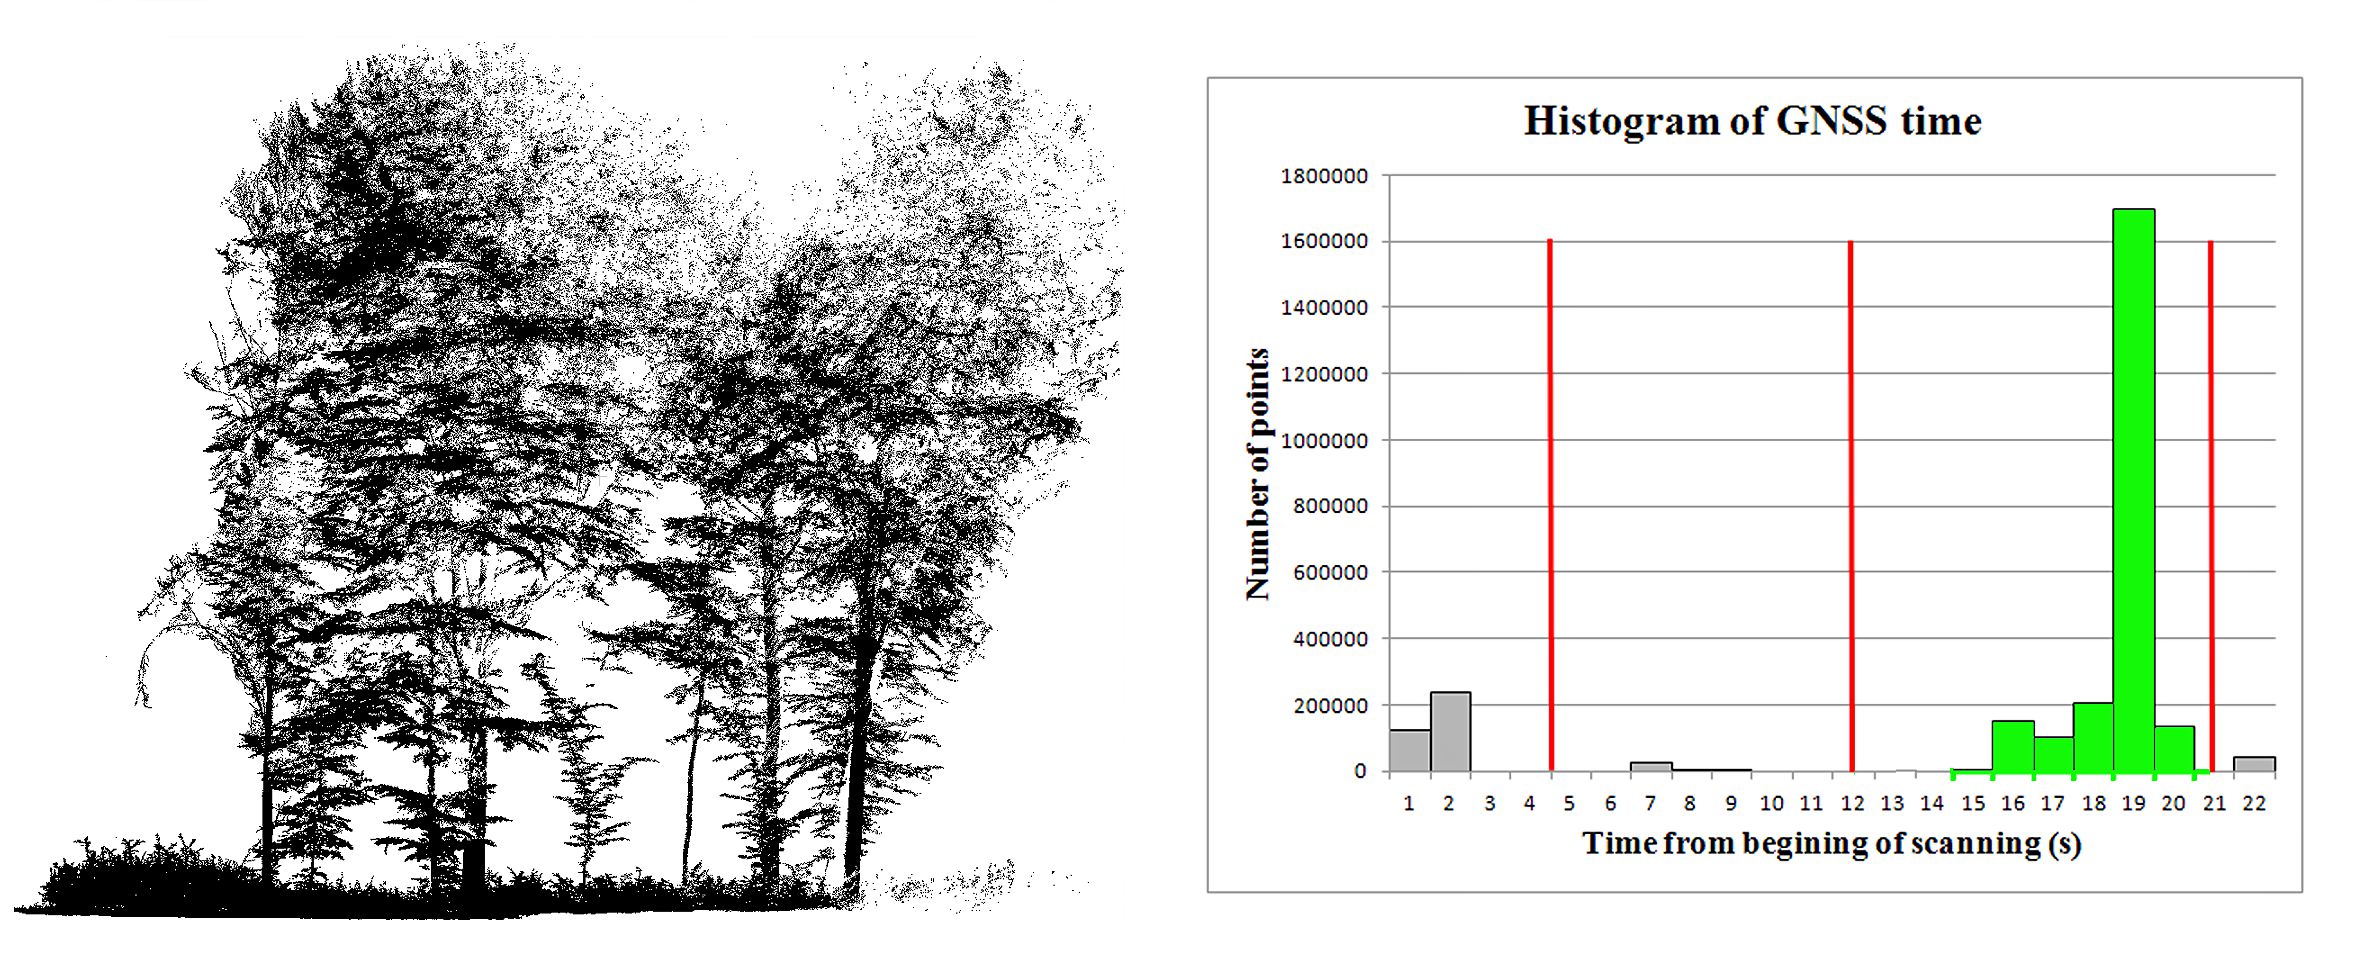 One of the point clouds extracted from the point cloud shown in Figure 1 using GNSS time-based point clustering. The point cloud consists of the highest number of points. The histogram of GNSS time for the point cloud is shown in the right part of the figure. The part of the histogram that corresponds to the displayed point cloud is highlighted in green.